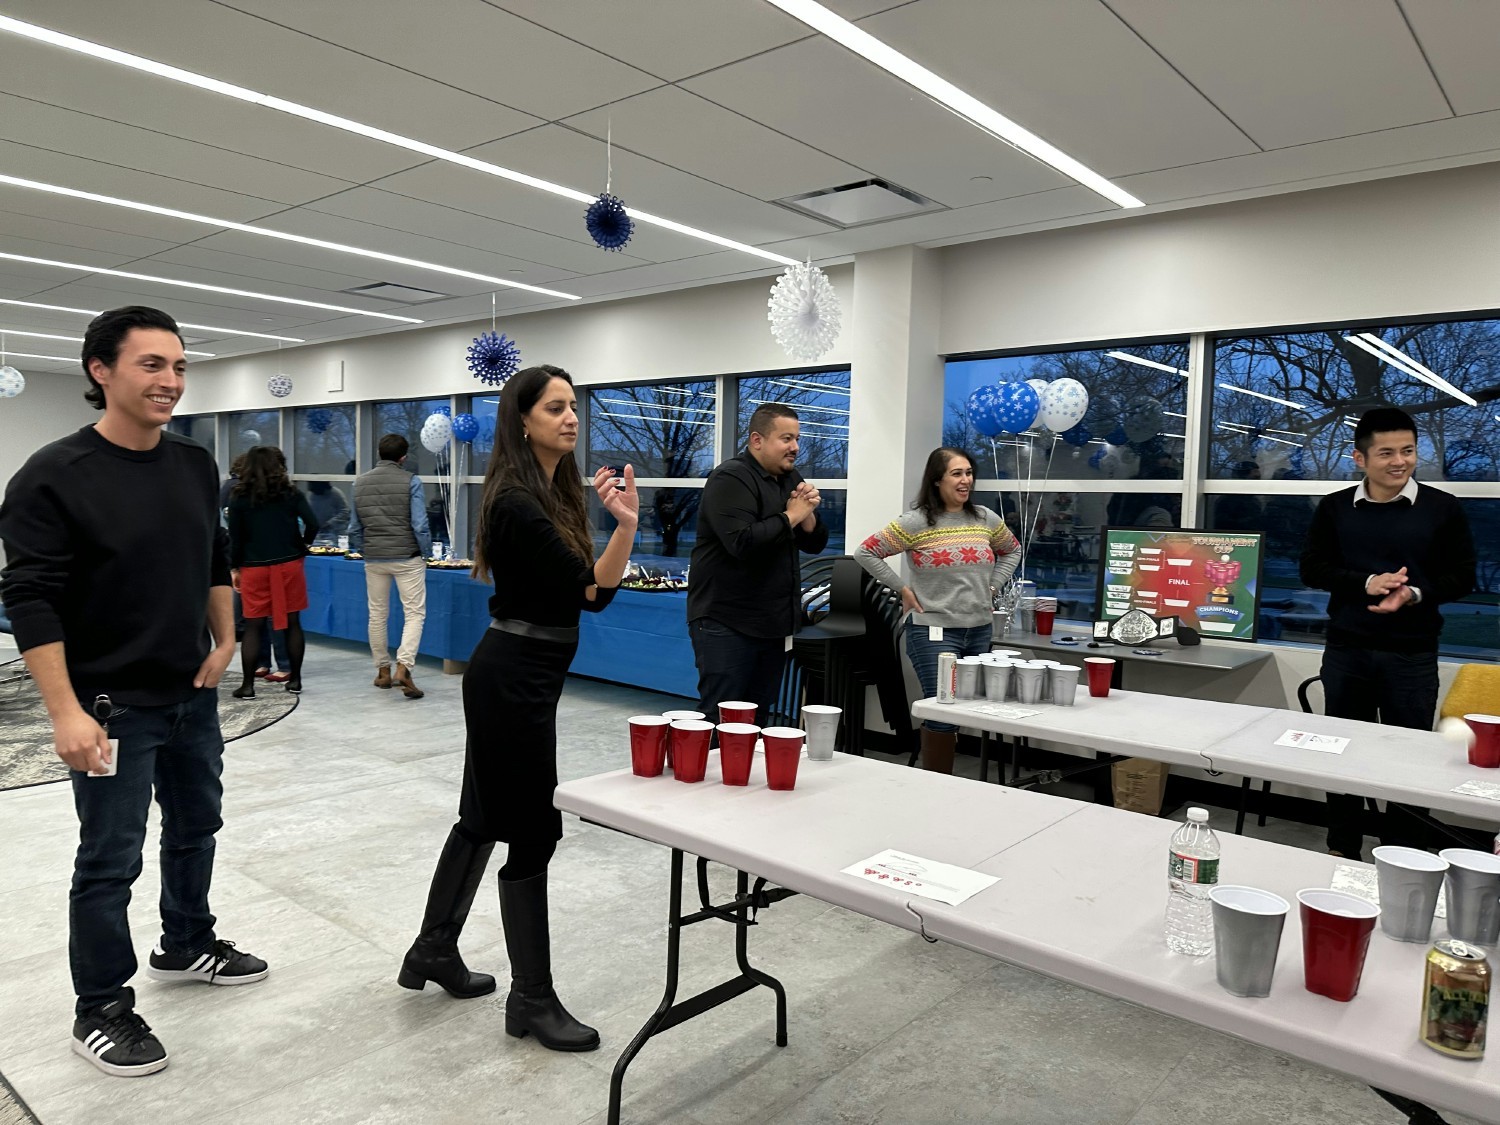 Winter Cup Pong Tournament: We hosted a Cup Tong tournament with amazing prizes during our holiday party.